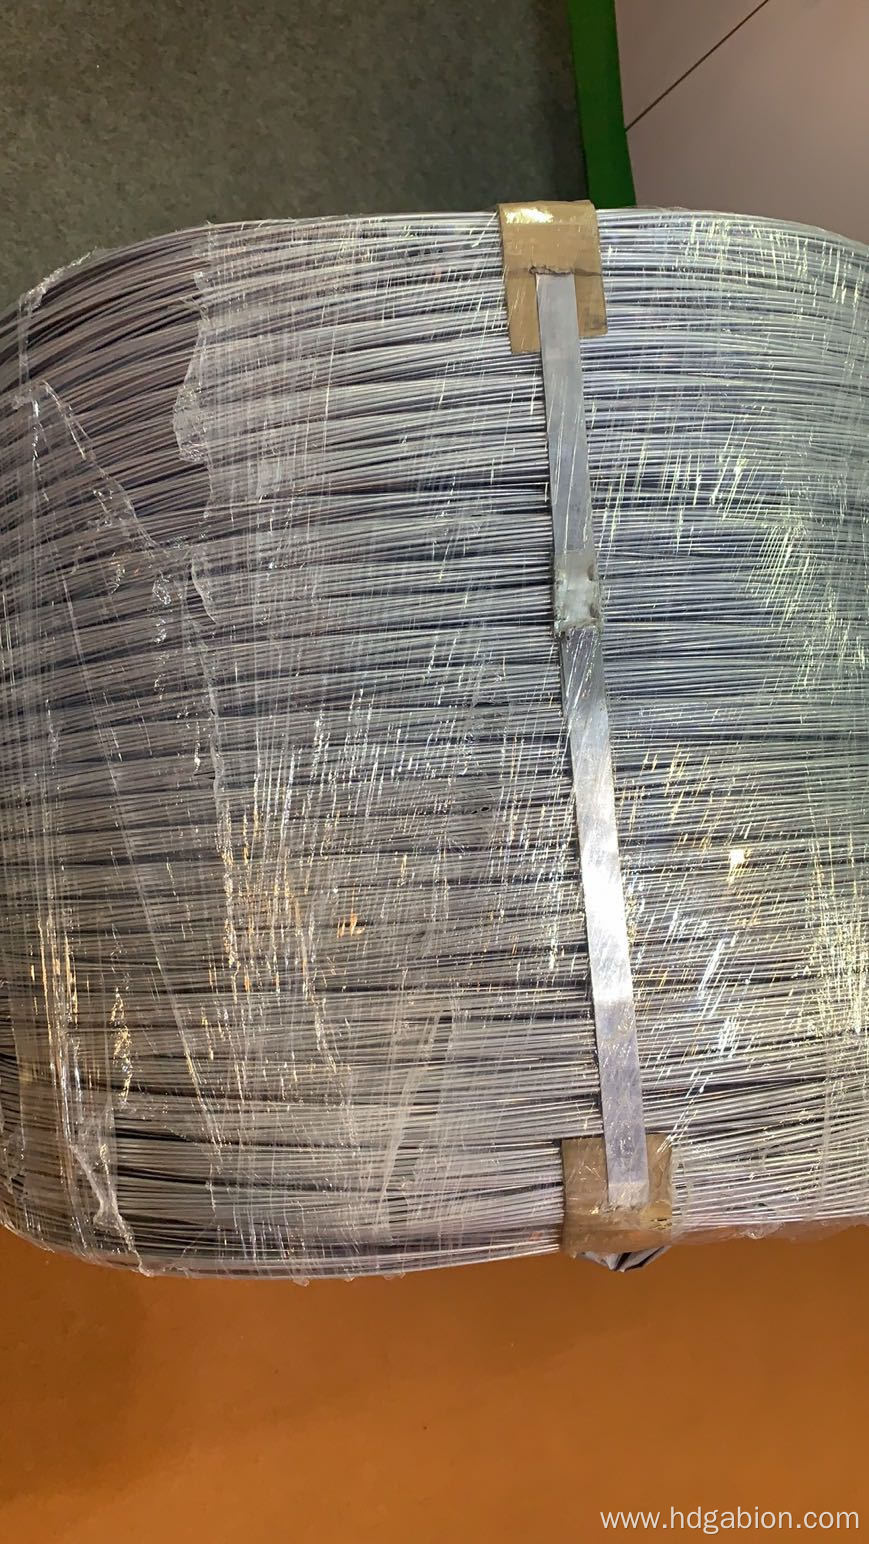 low price high quality galvanized binding wire